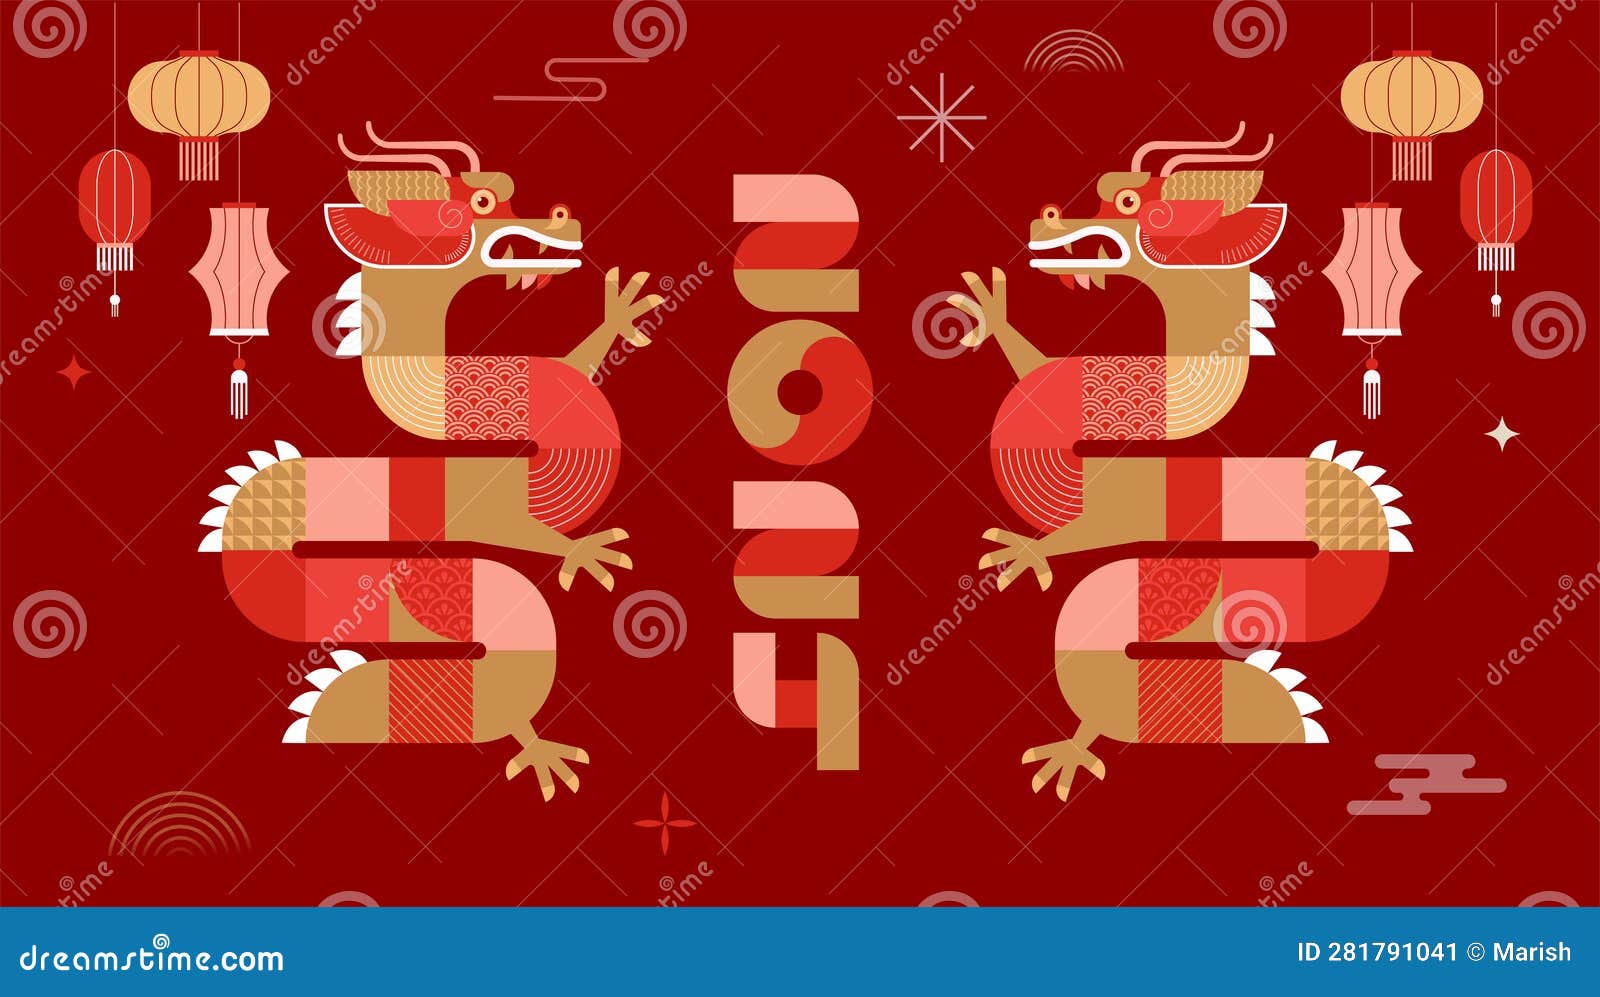 lunar new year background, banner, chinese new year 2024 , year of the dragon. geometric modern style